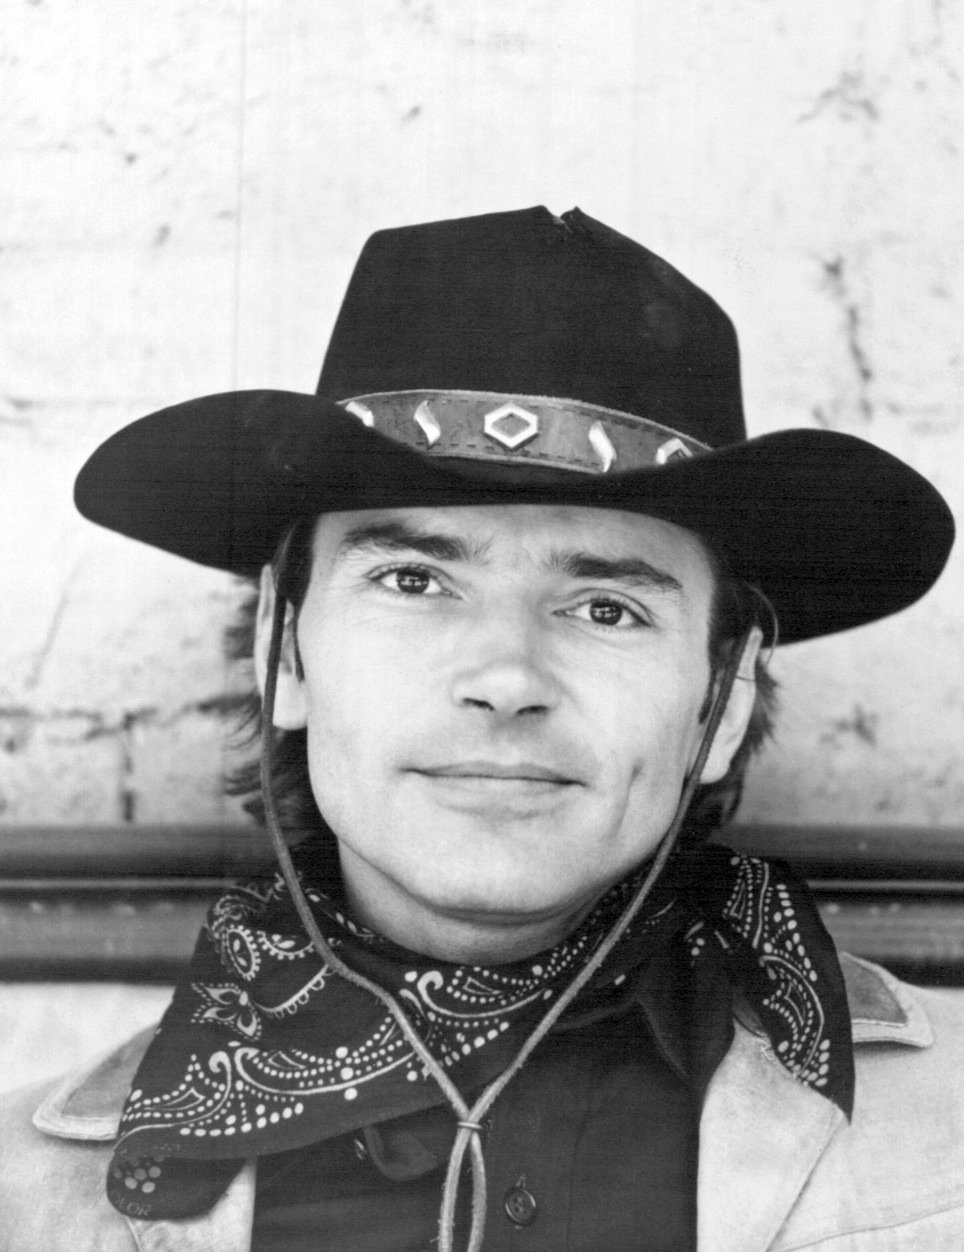 Pete Duel from the television series "Alias Smith and Jones" on August 16, 1971 | Source: Wikimedia Commons, Public Domain